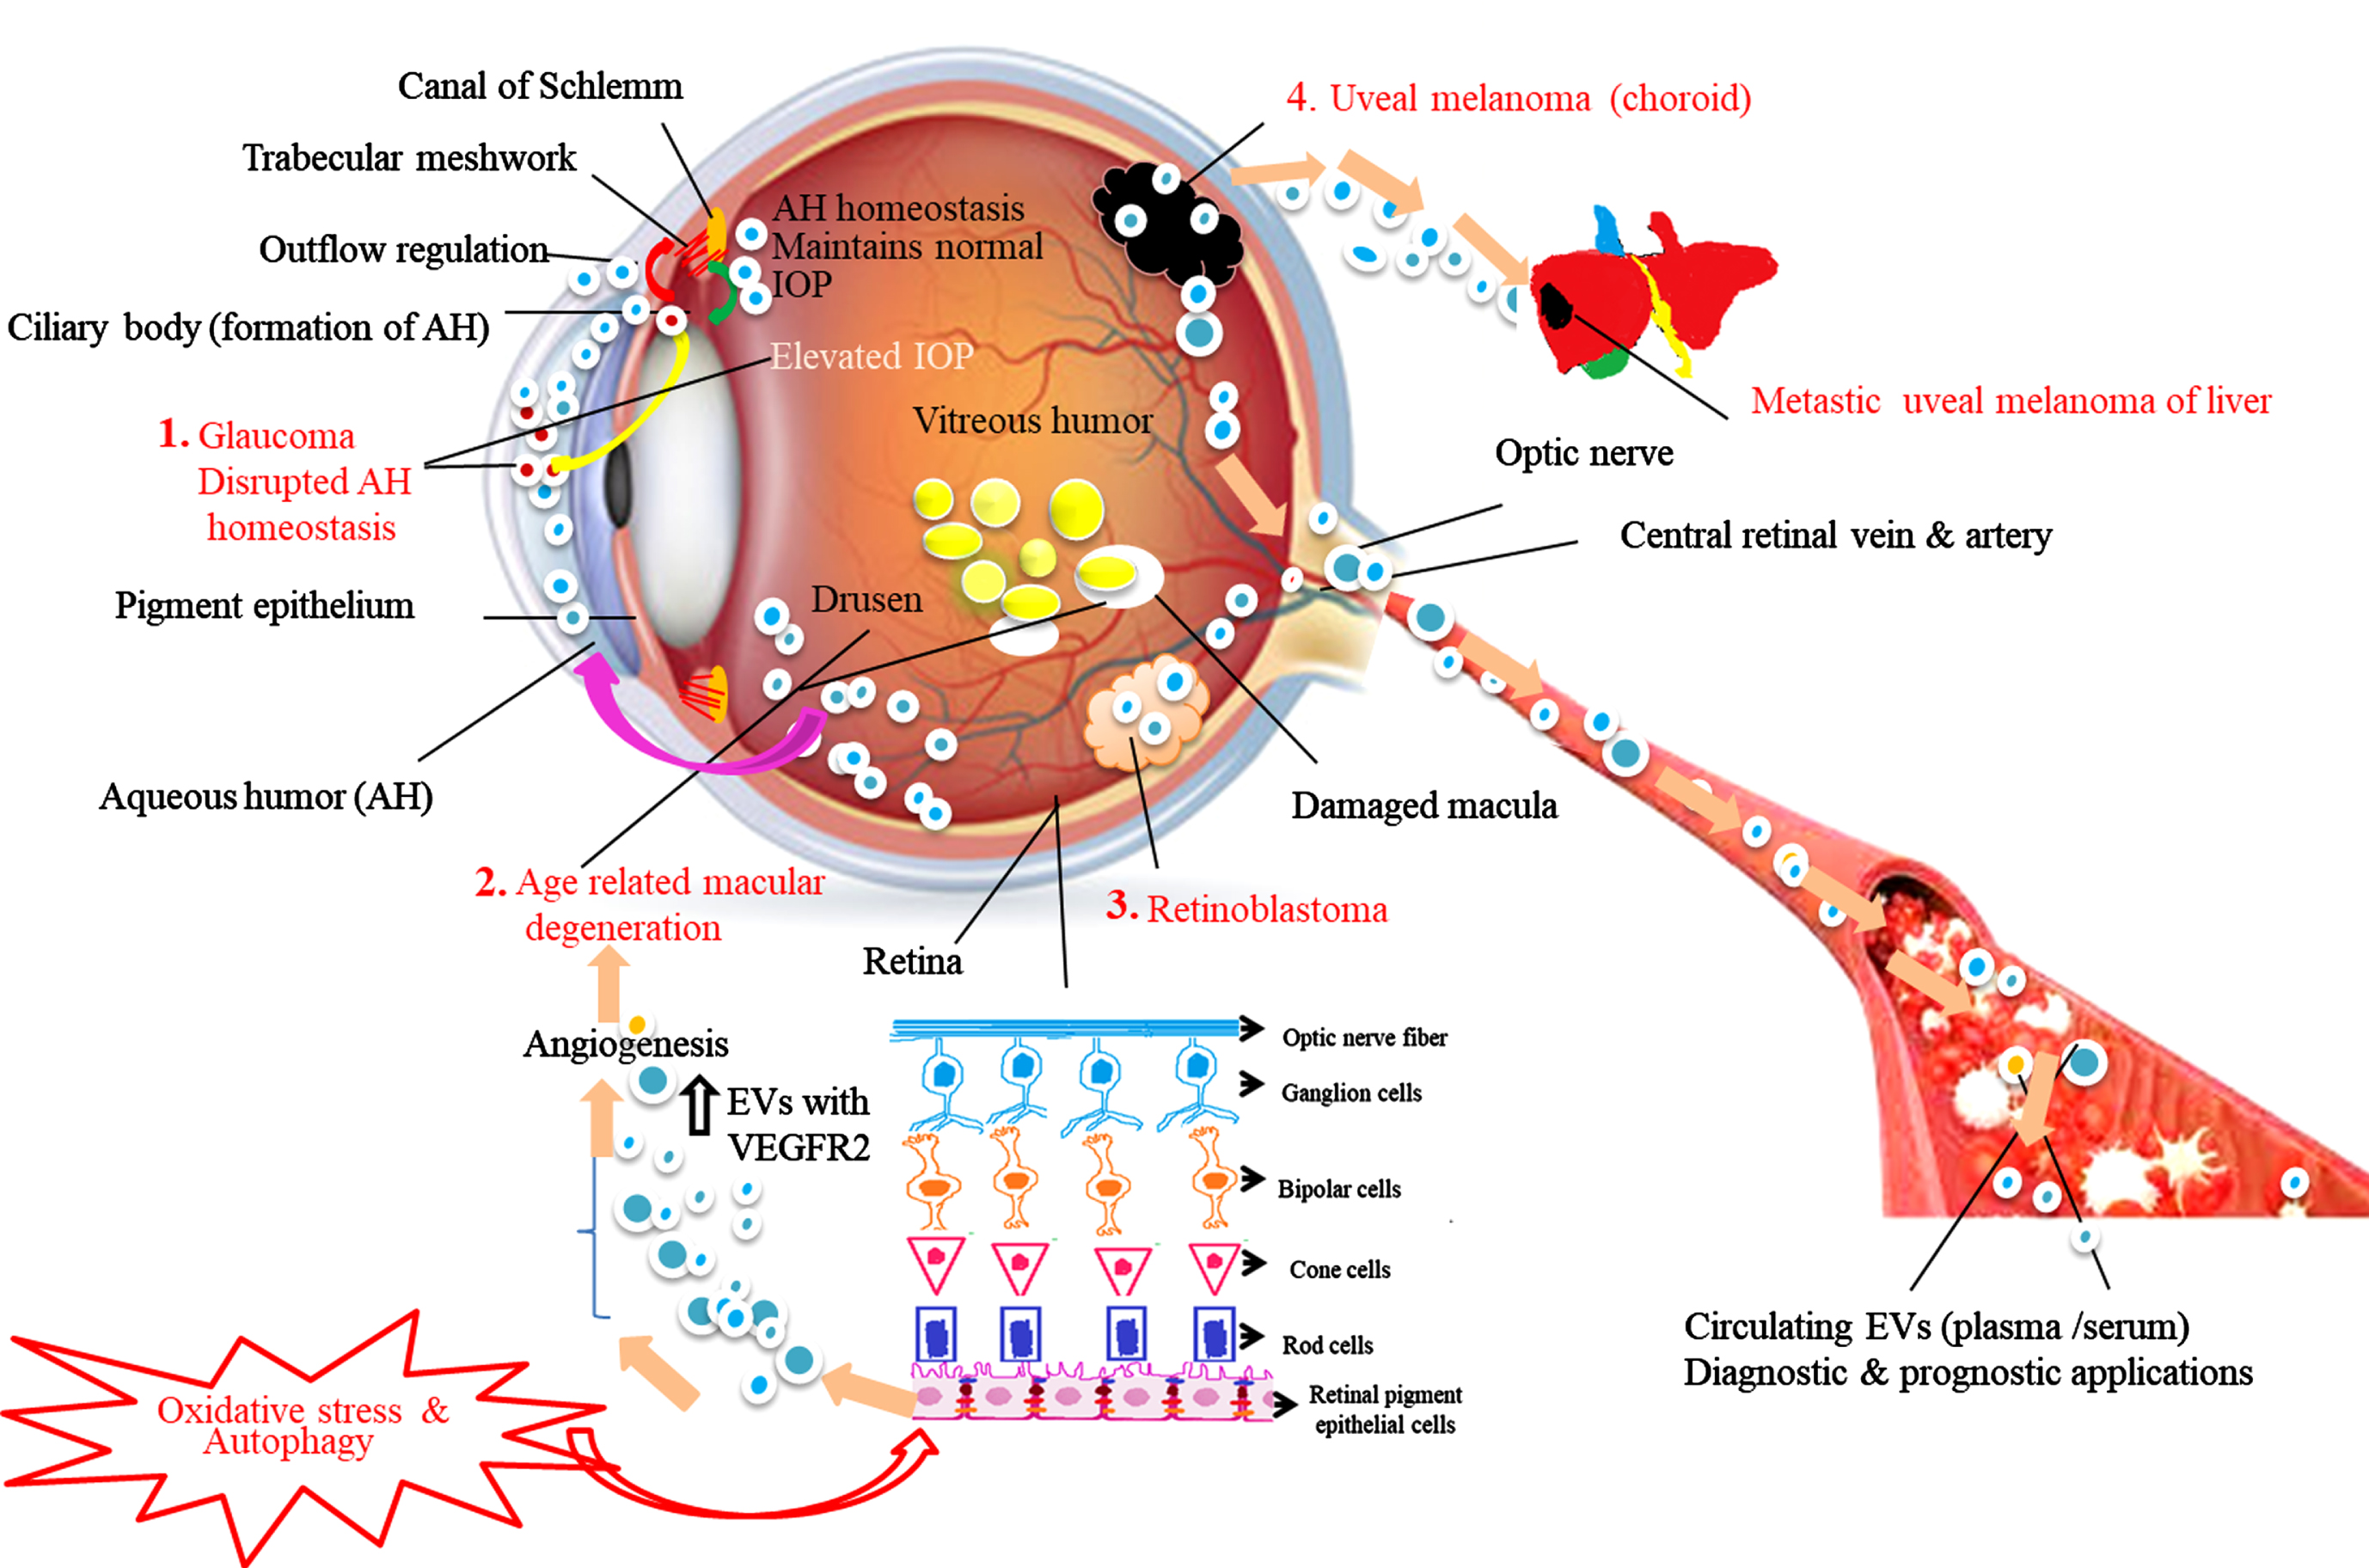 Schematic representation of the role of exosomes in aqueous humor (AH) homeostasis under normal and disease conditions. Red arrows show the movement of exosomes from the ciliary body (CB -site of AH production) to trabecular meshwork (TM). The green arrow show the movement of exosomes from TM to CB. Based on the available literature, we speculate that exosomes control AH outflow and inflow regulation, maintain AH equilibrium and normal intraocular pressure (IOP). 1. Glaucoma: Myocilin-derived EVs (red circles) released from CB (yellow arrow) diffuse into the AH causing disrupted AH homeostasis blocking TM resulting in elevated IOP leads to impaired vision. 2. Age-related macular degeneration (AMD): In response to oxidative stress and autophagy retinal pigment epithelial (RPE) cells, the outer layer of retina cells release higher concentration of exosomes having elevated expression of VEGFR2 into the anterior chamber (pink arrow) induces new blood vessels formation and drusen leads to AMD condition. 3. Retinoblastoma (RB): Exosomes released from RB tumors enter into the systemic circulation. 4. Uveal melanoma (UM): Exosomes released from primary UM involve tumor invasion, migration, and formation of metastatic niche in liver, the most common metastatic site for UM. Exosomes and their molecular content released into the systemic circulation during the above disease conditions serve as disease signature markers and possess diverse diagnostic and prognostic potential.